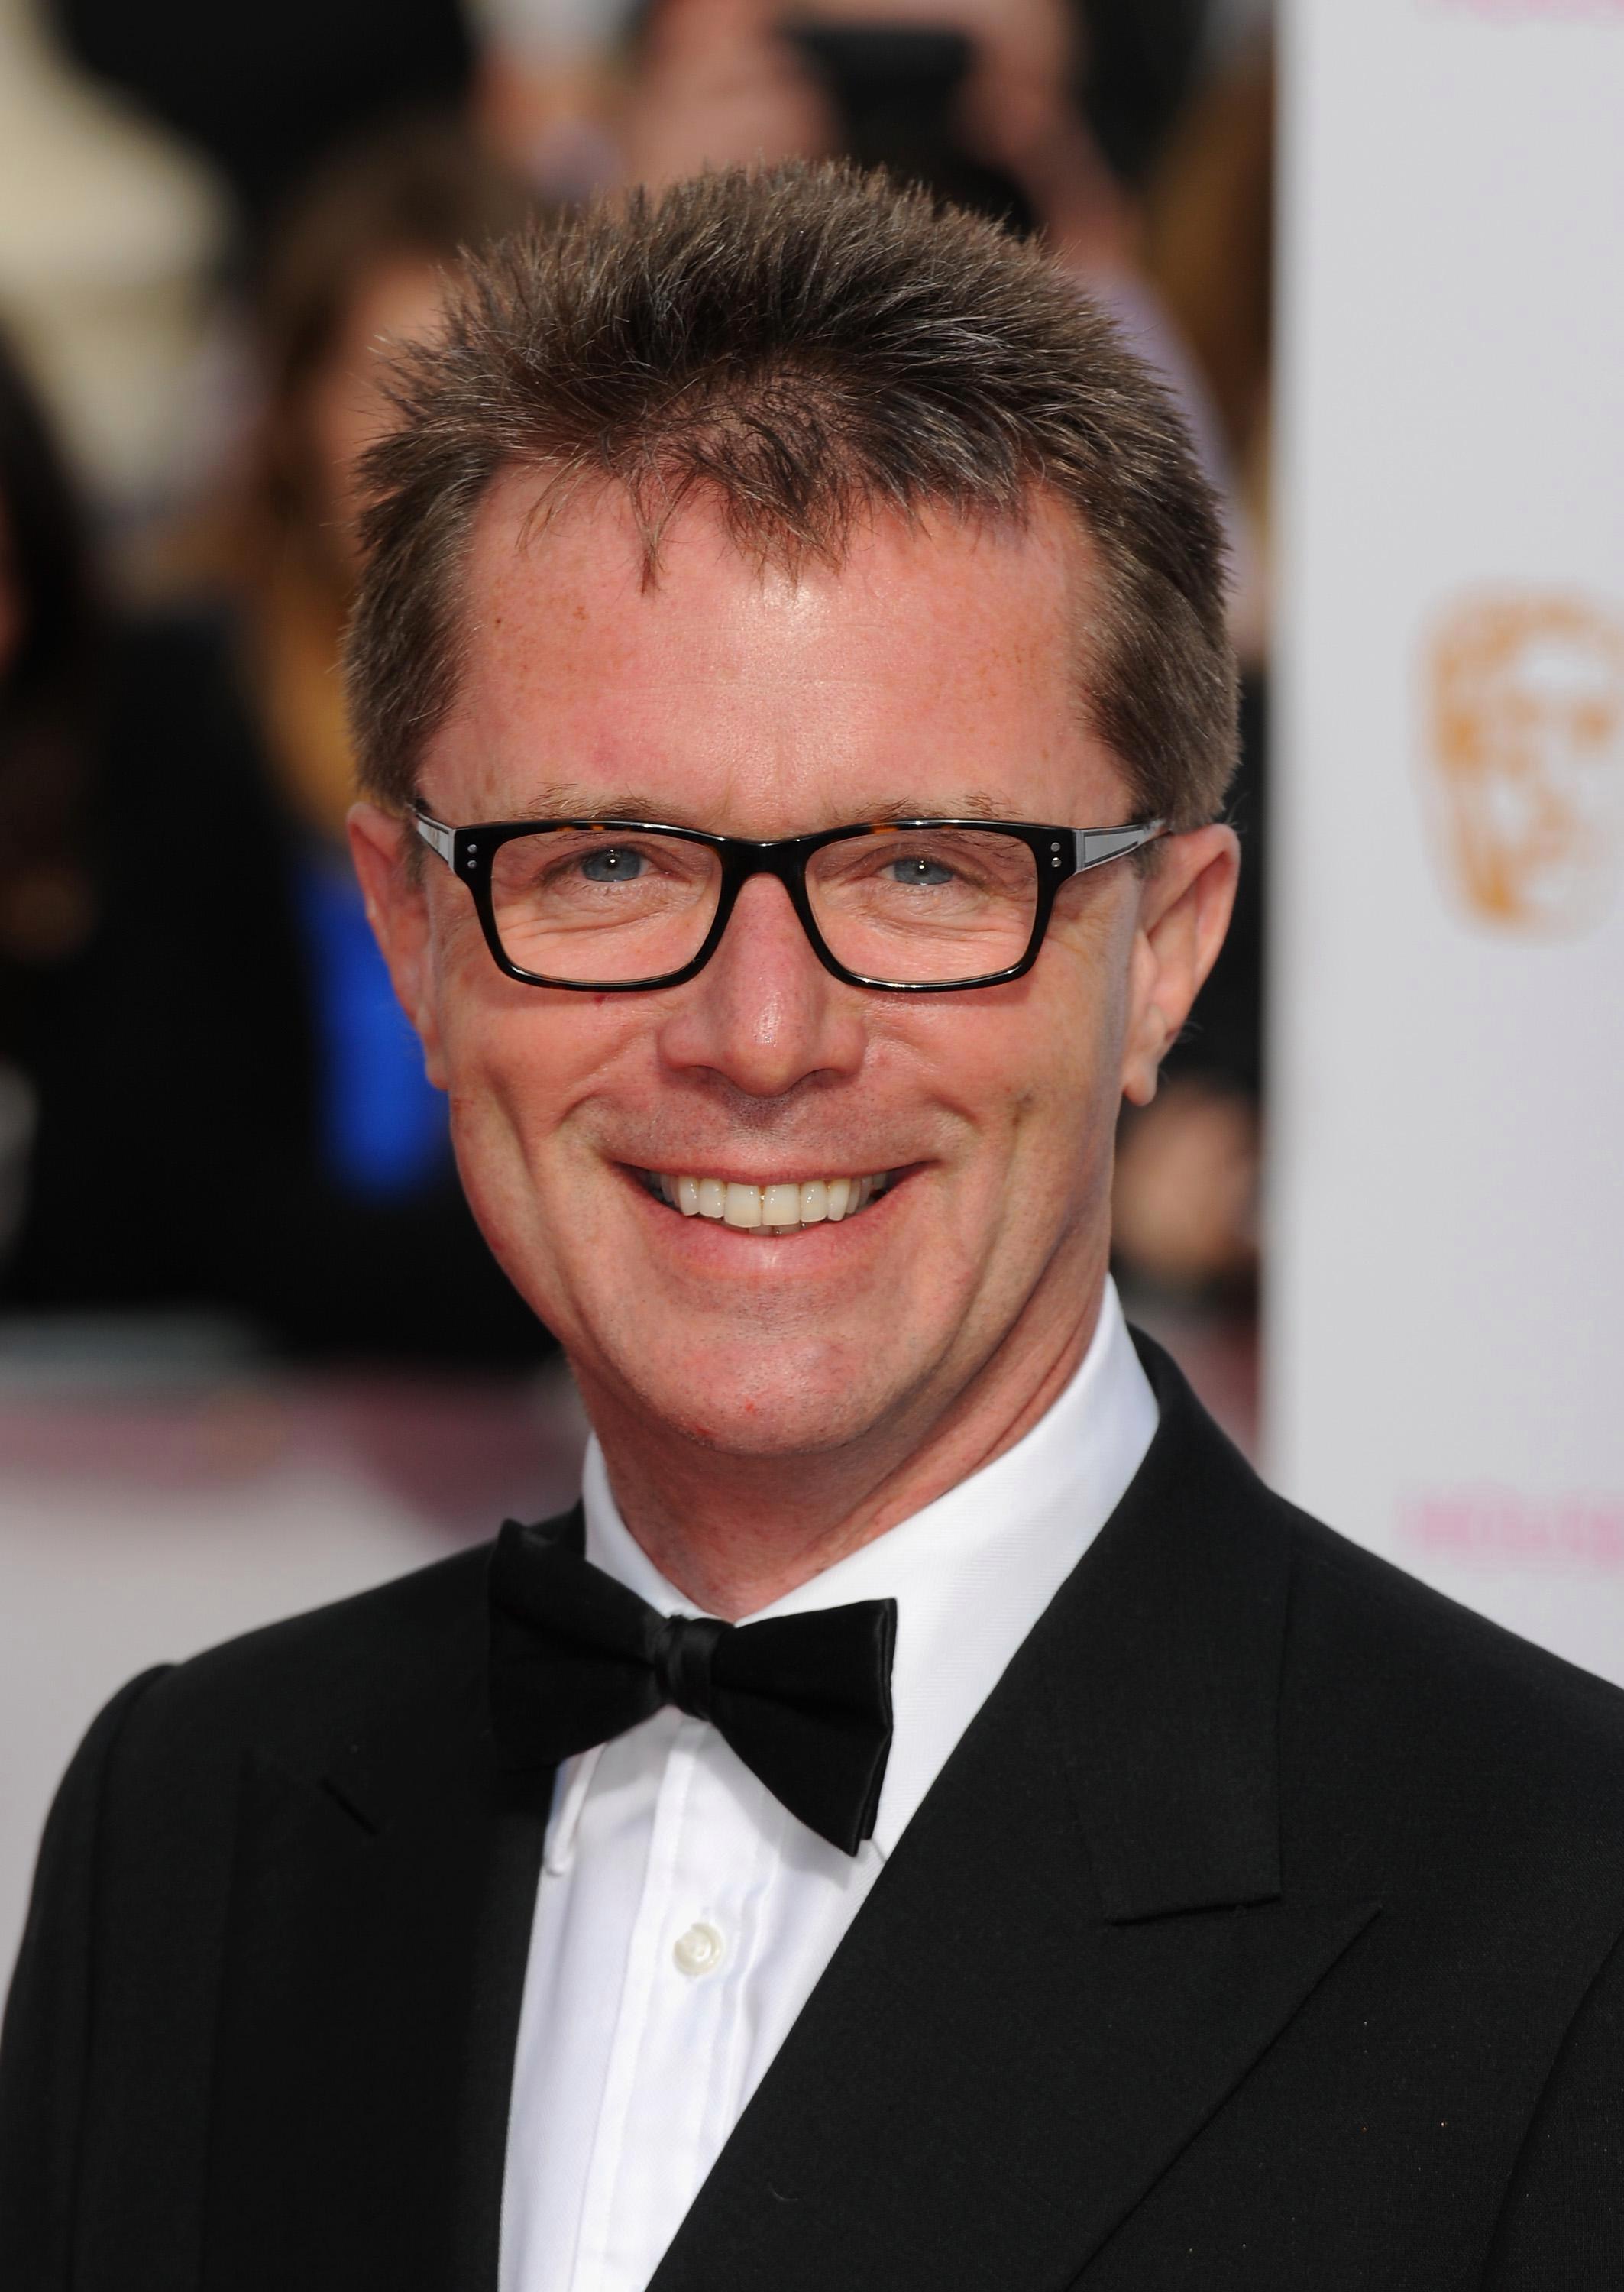 How tall is Nicky Campbell?